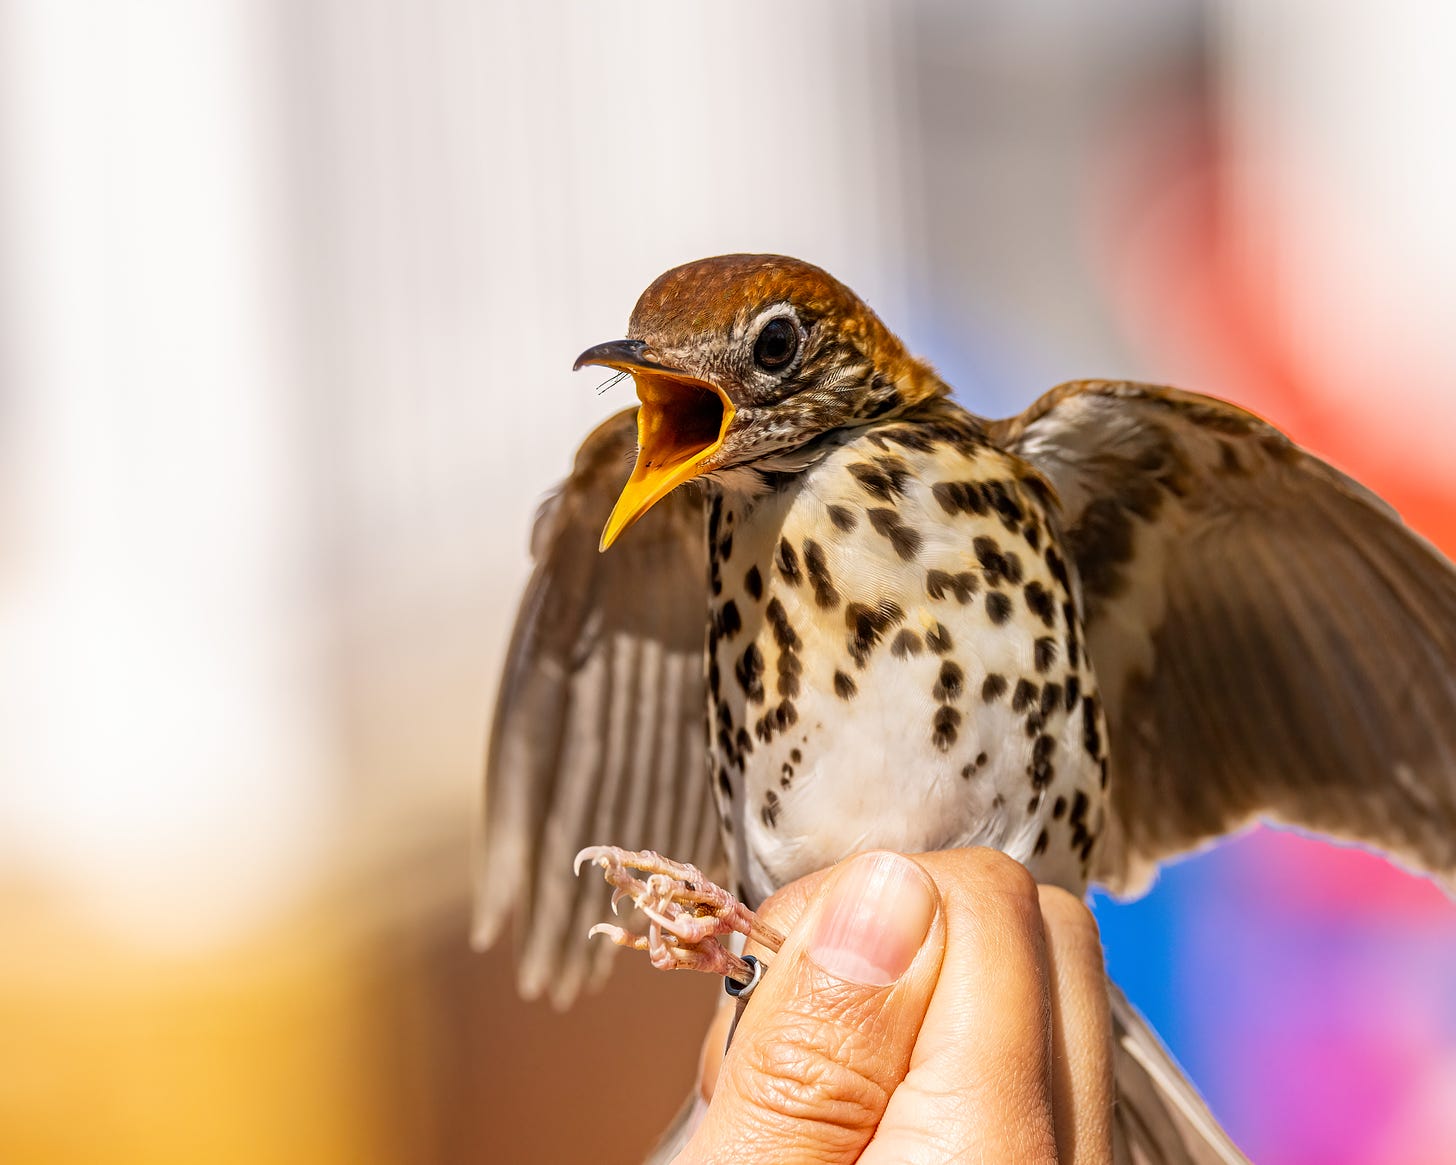 In this image a human hand is holding a wood thrush, which is flapping its wings and opening its beak. The bird is  agitated. The wood thrush is mostly brown with a rusty head and bright spots on its chest.